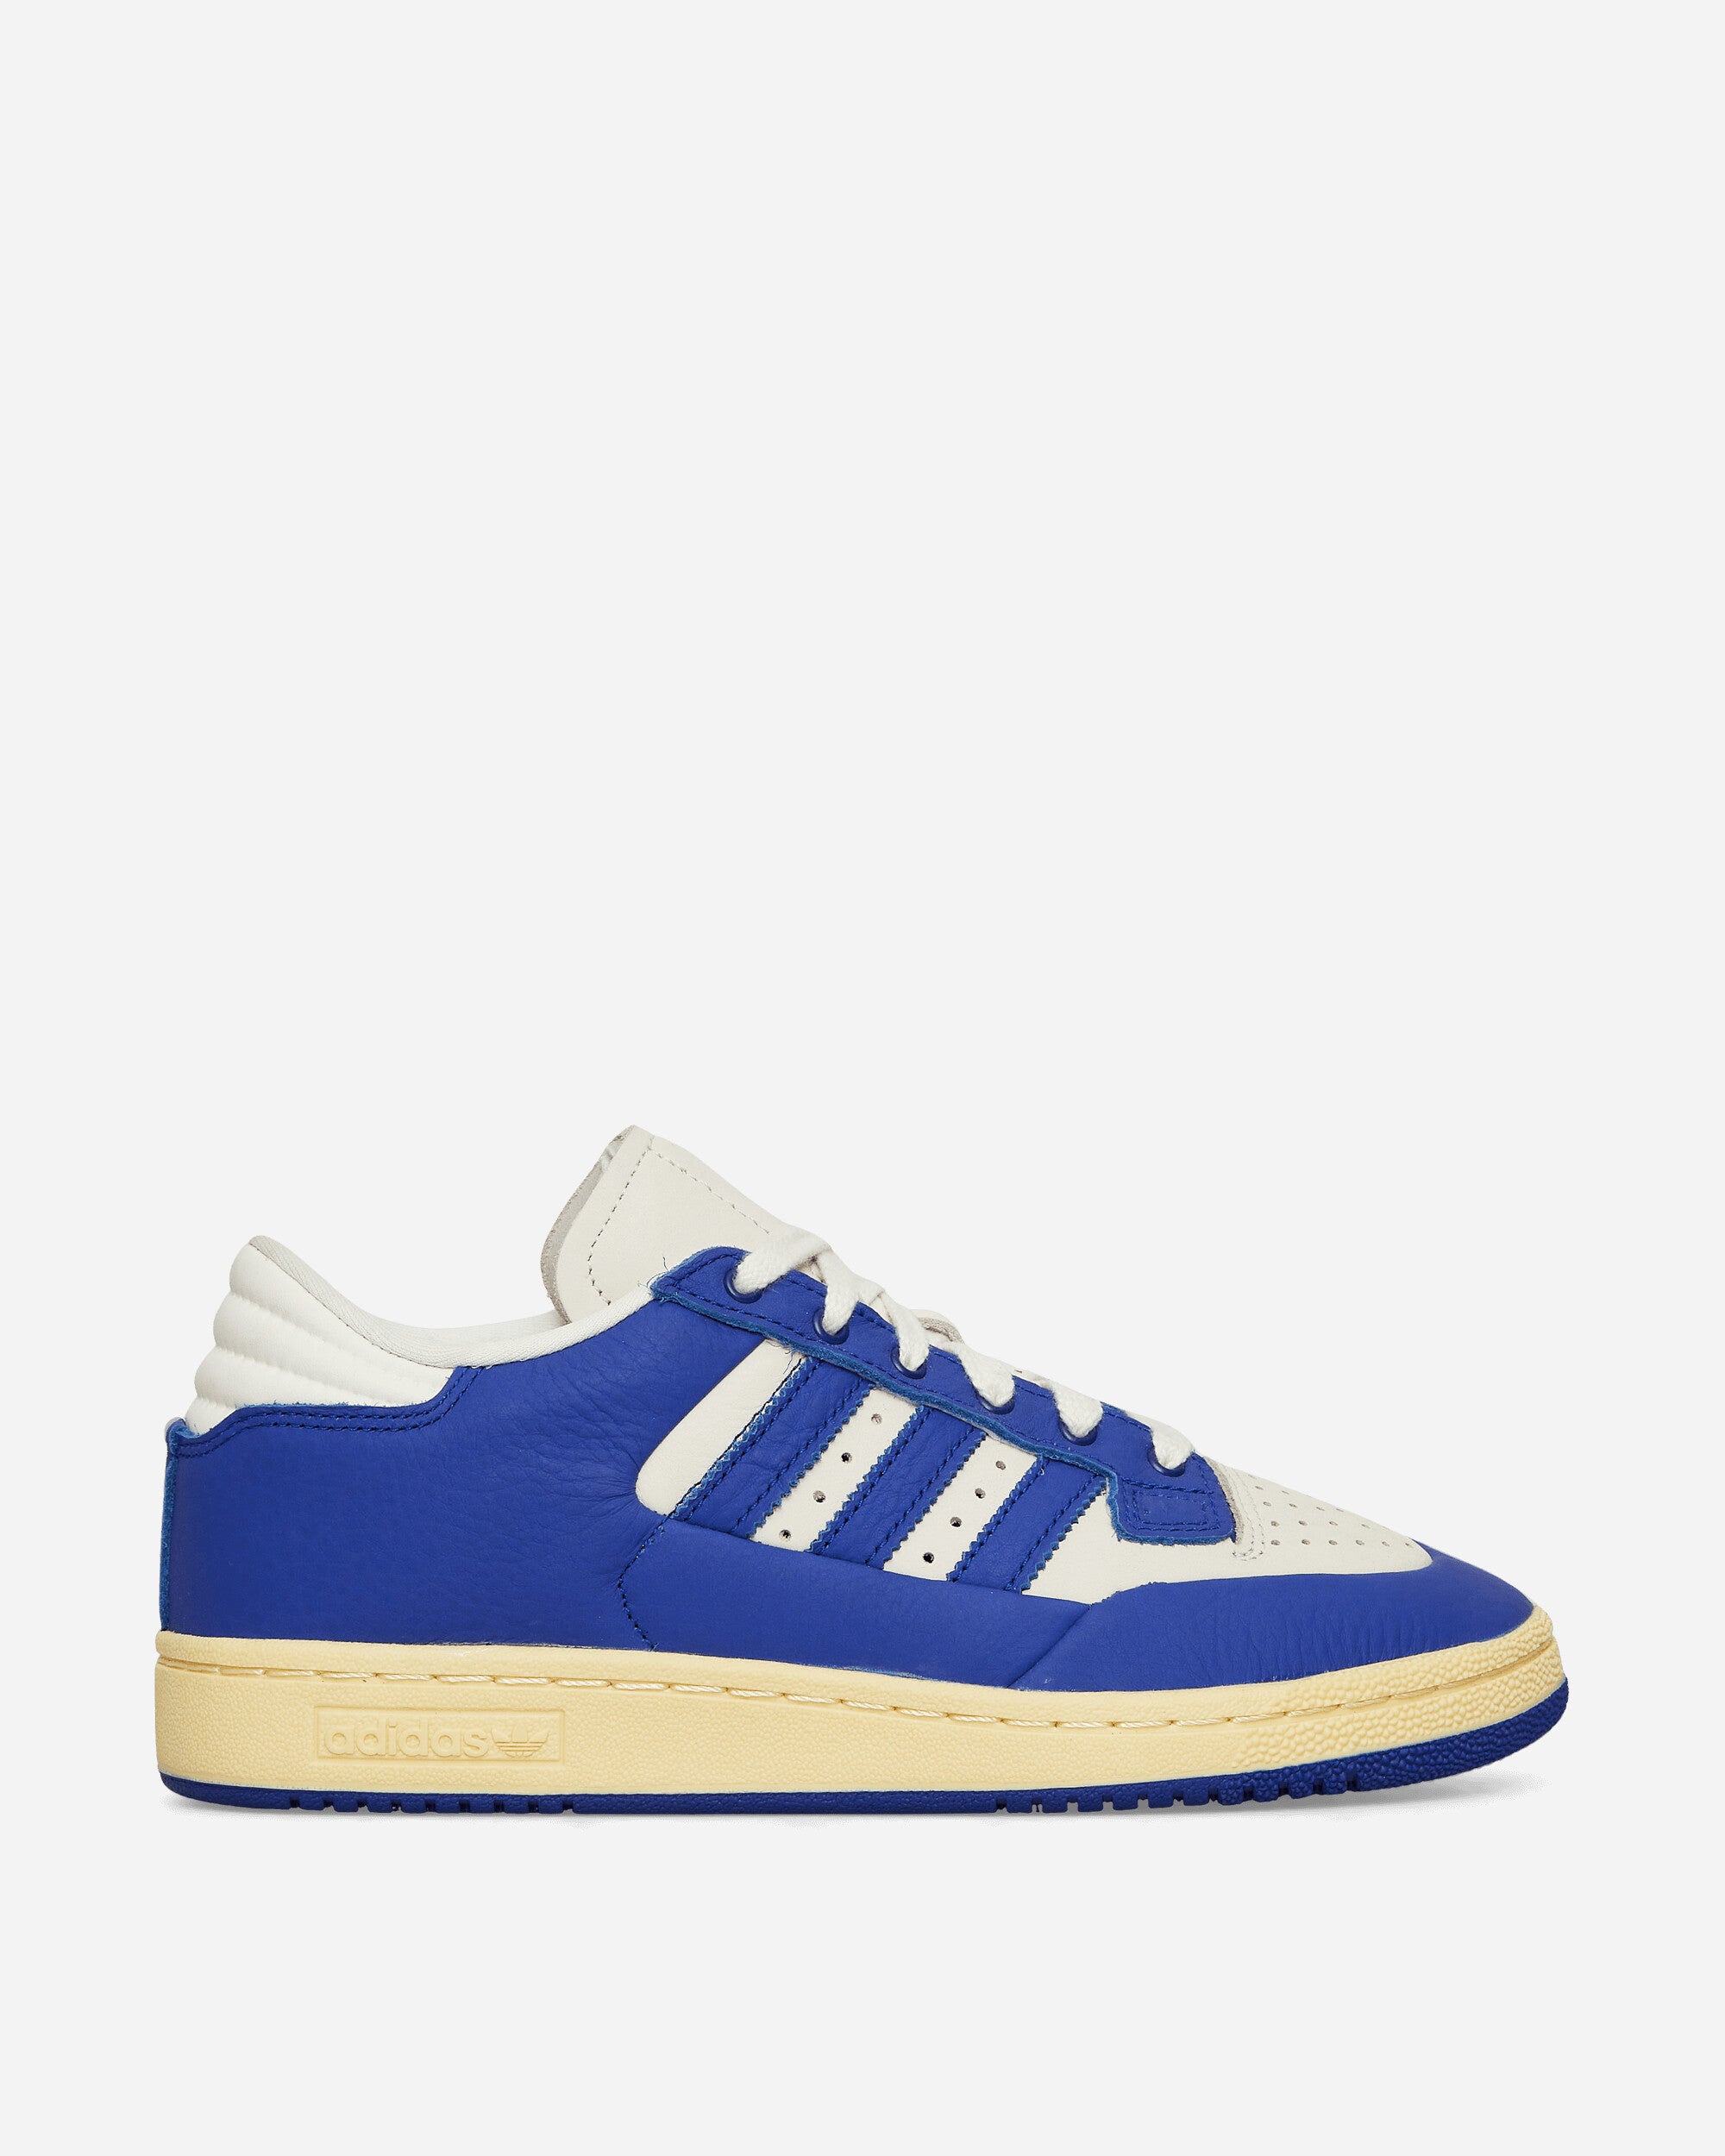 adidas Centennial 85 Lo 002 Lucid Blue/Cloud White Sneakers Low IF4423 001